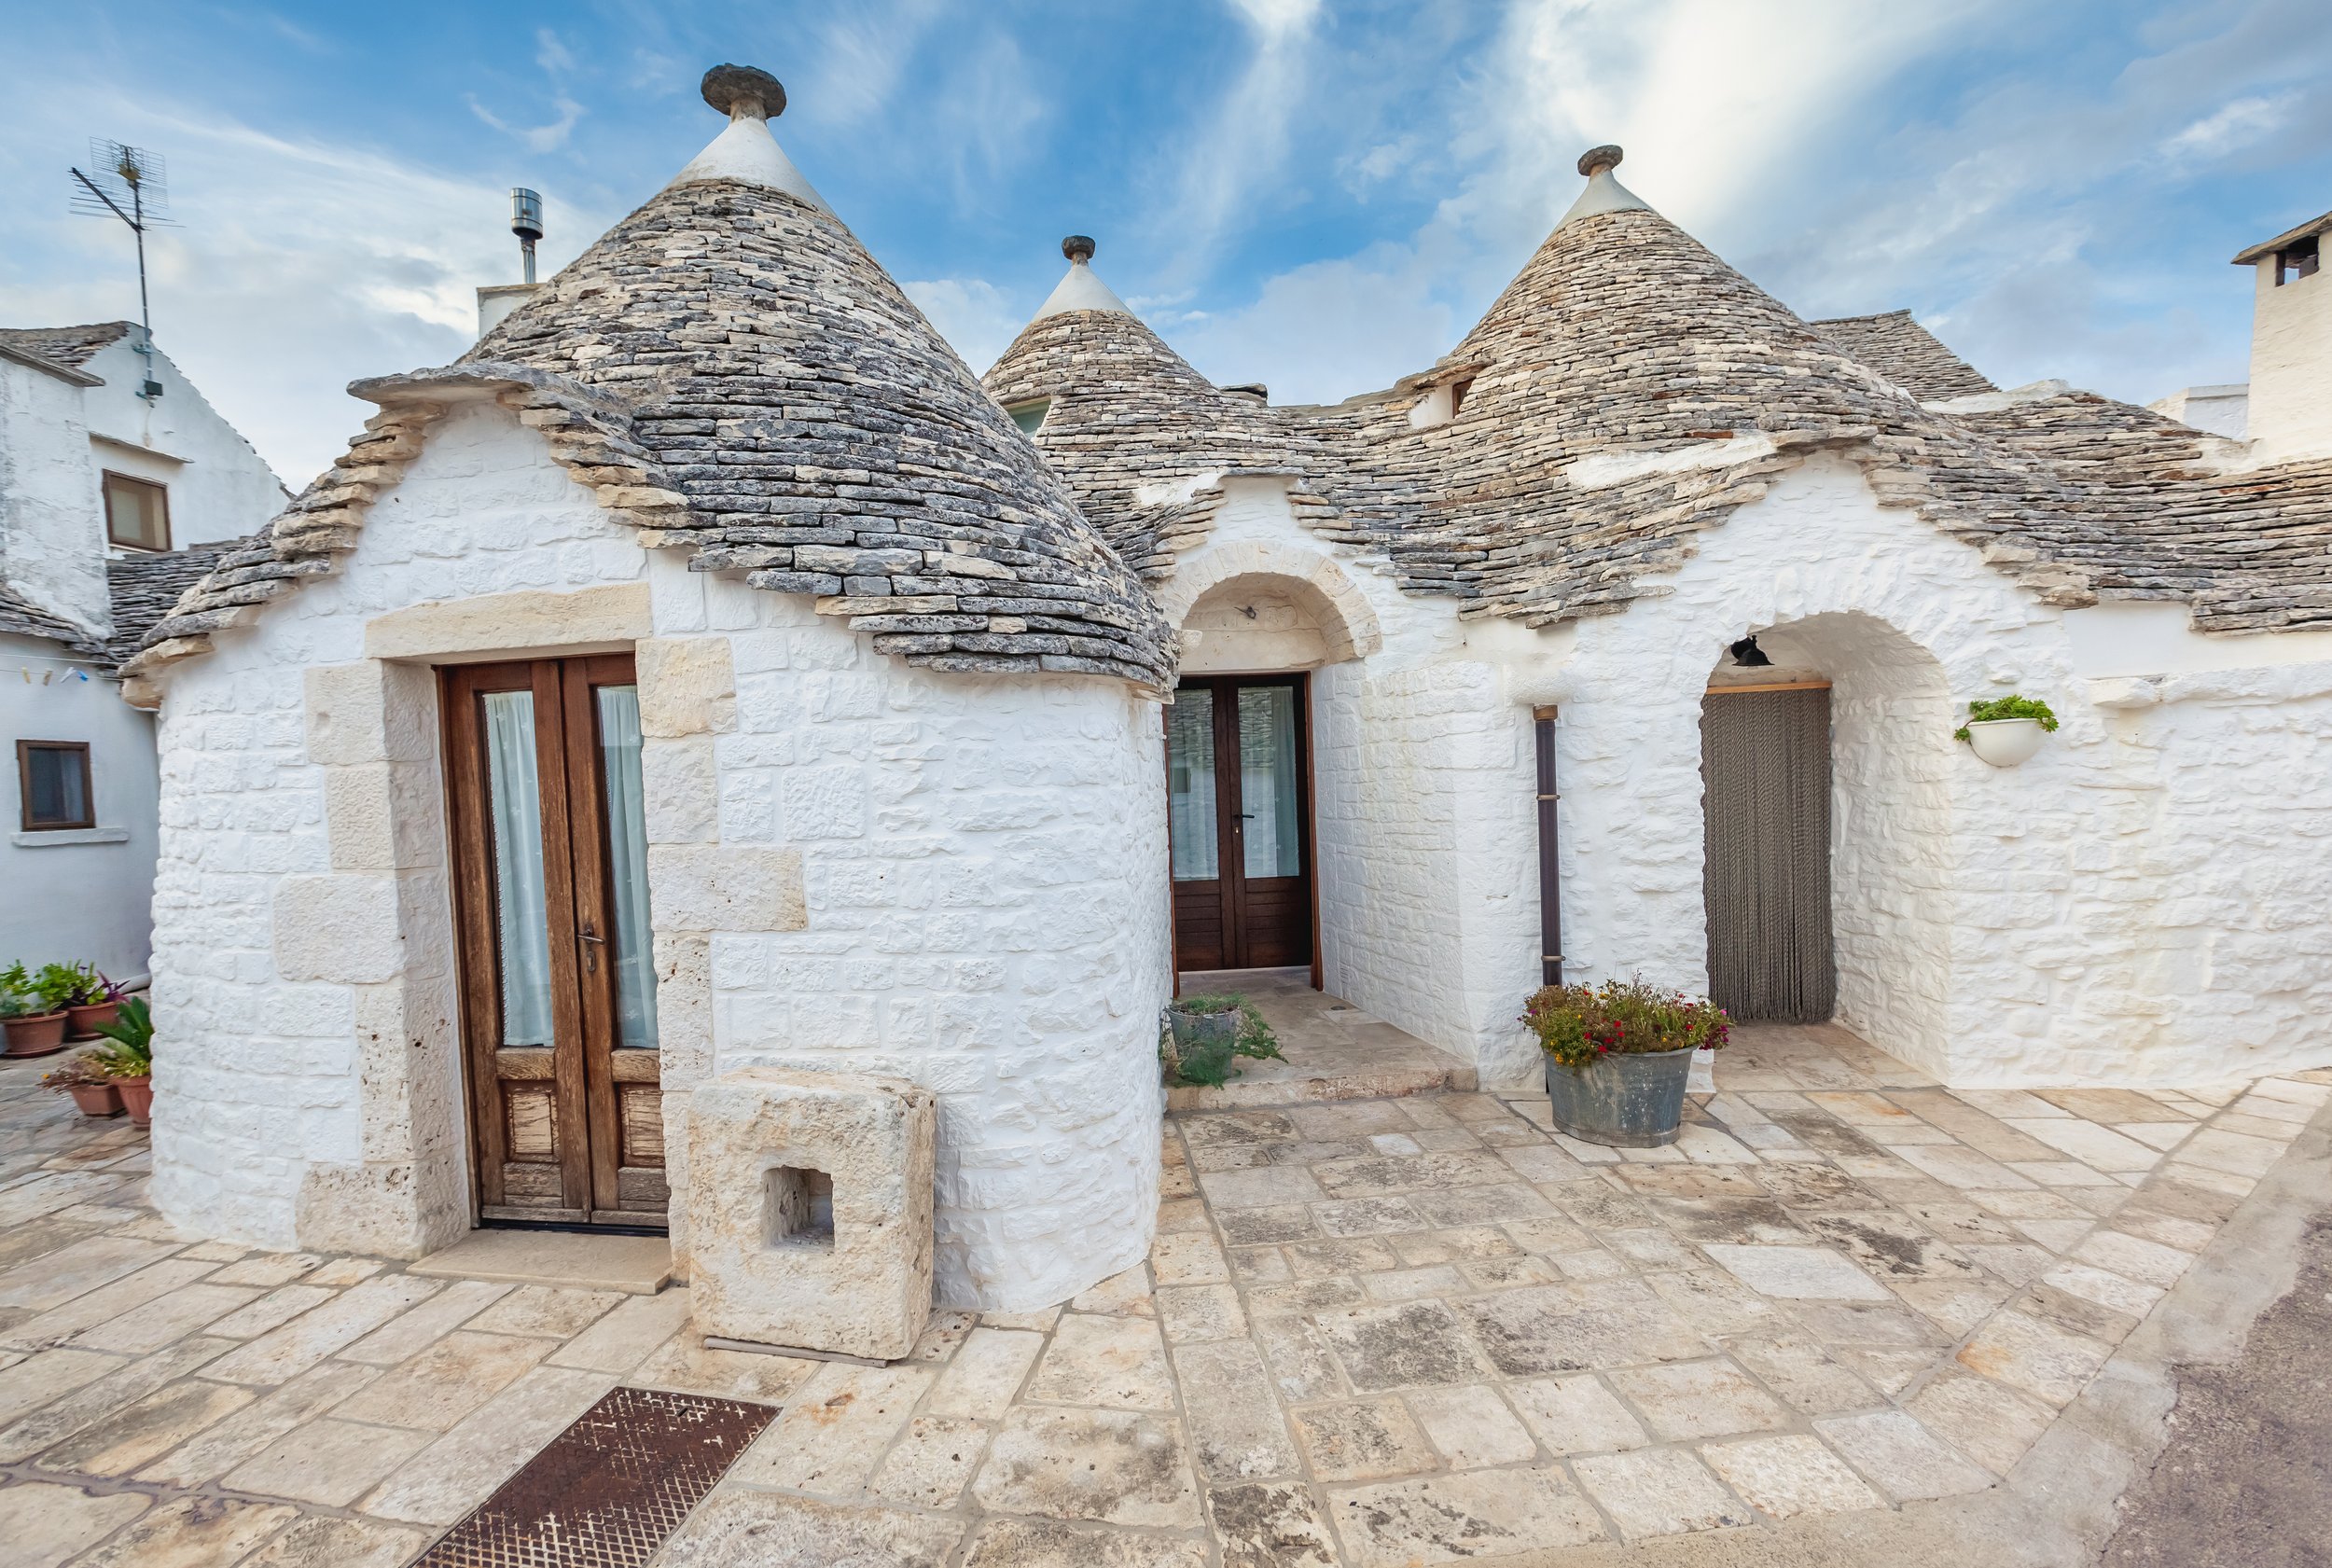 wonderful-town-alberobello-with-trulli-houses-among-green-plants-flowers-main-touristic-district-apulia-region-southern-italy-typical-buildings-built-with-dry-stone-walls-conical-roof.jpg